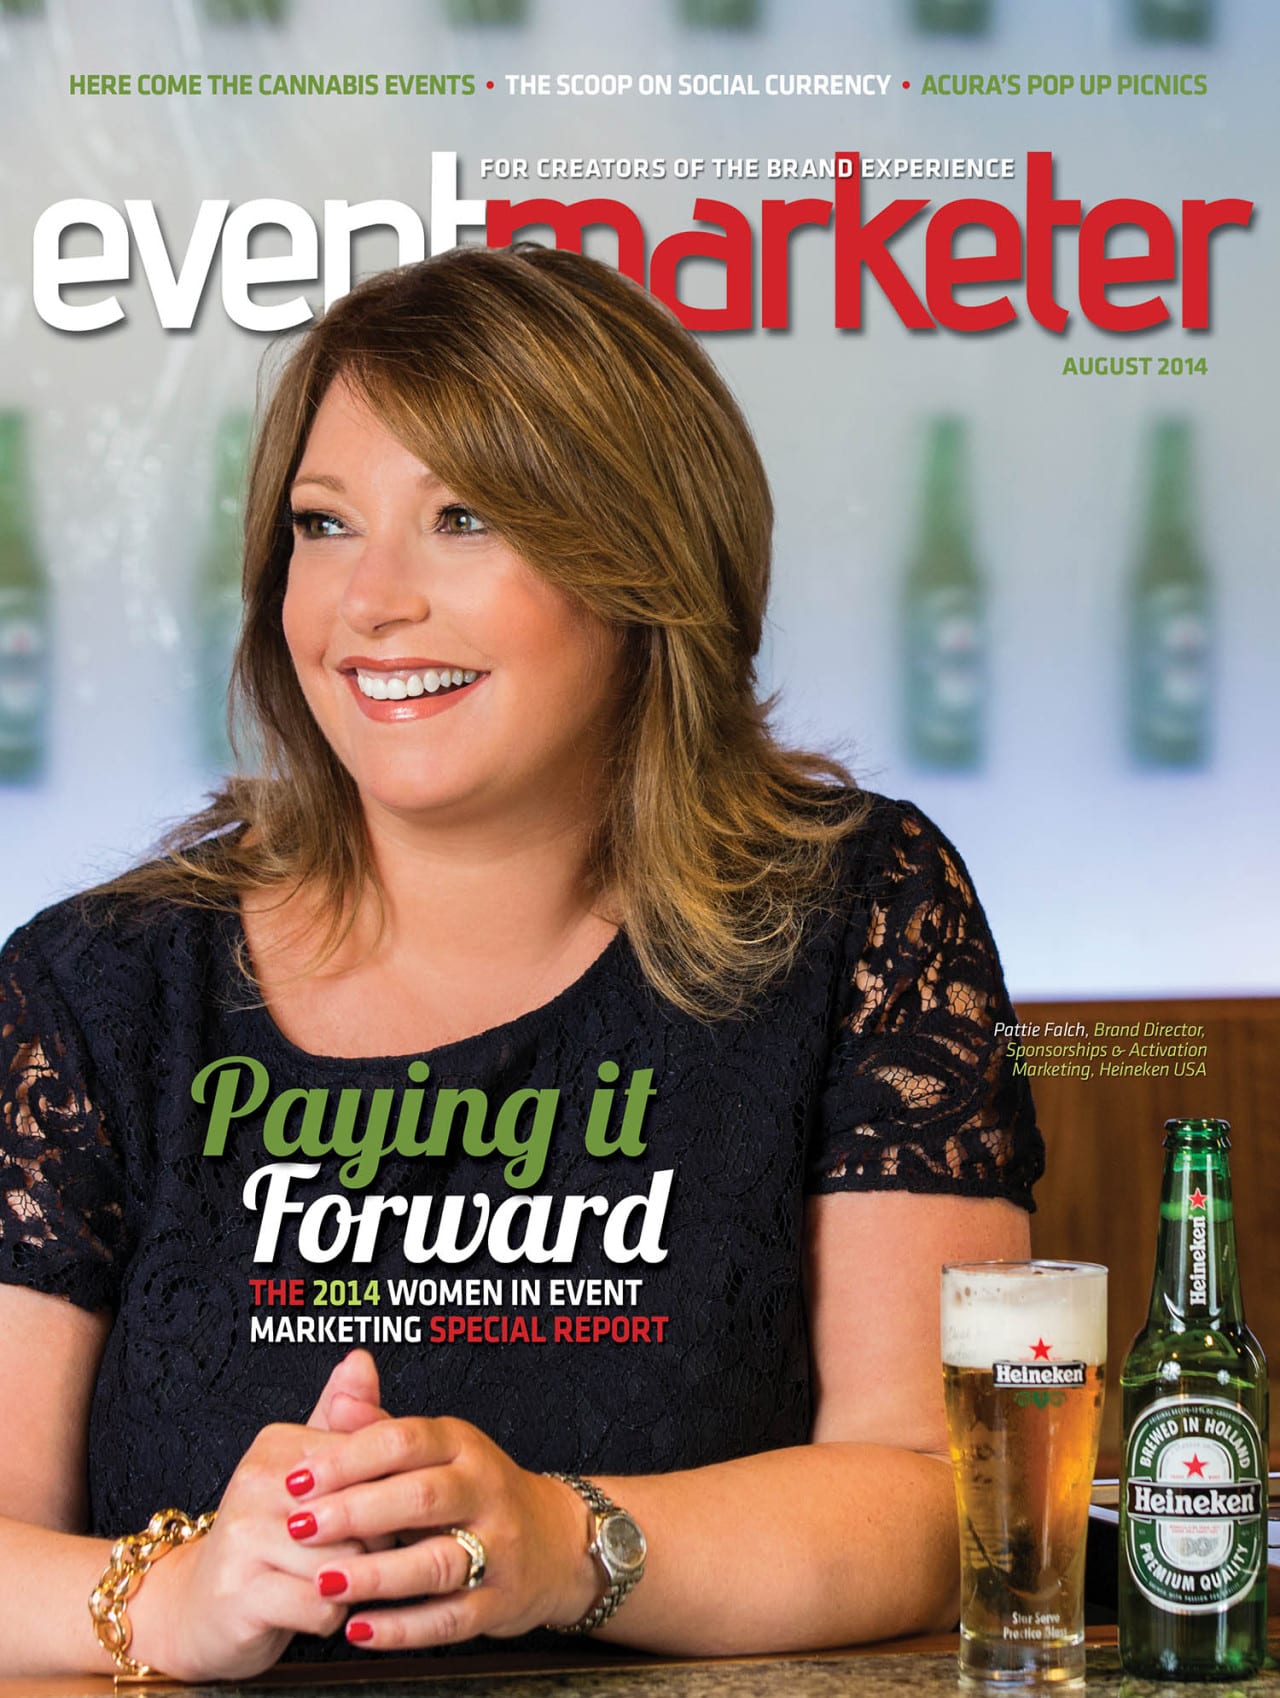 Event Marketer August 2014 Issue